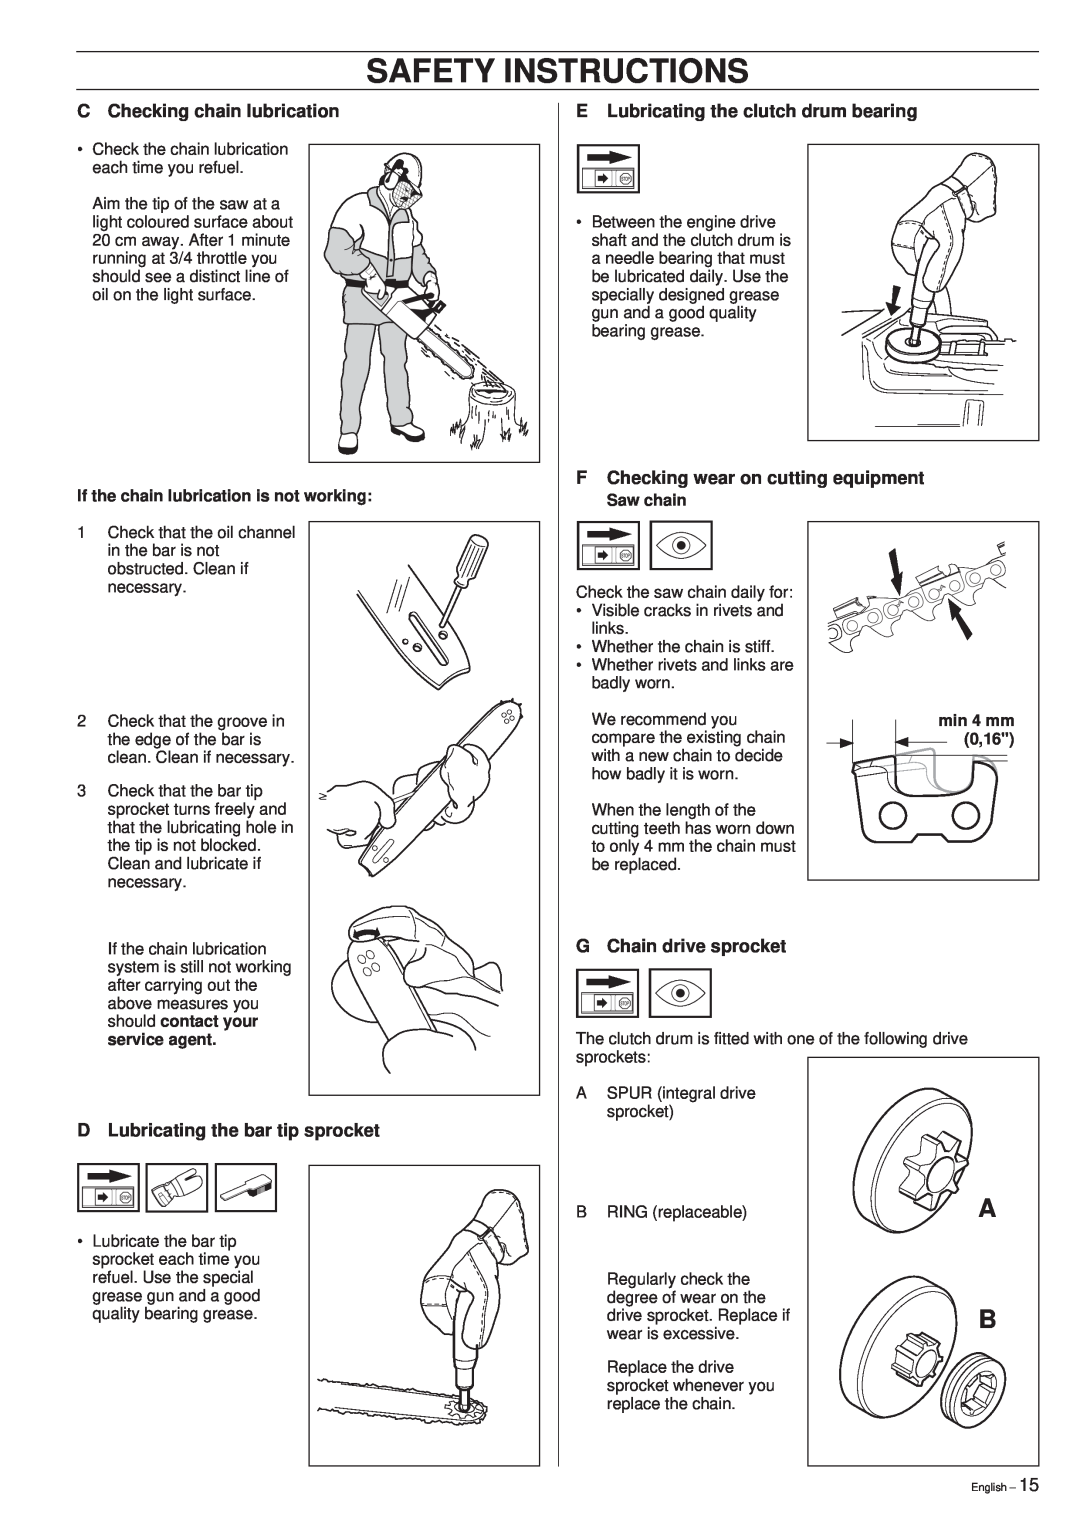 Husqvarna 40 manual Safety Instructions, C Checking chain lubrication, E Lubricating the clutch drum bearing 